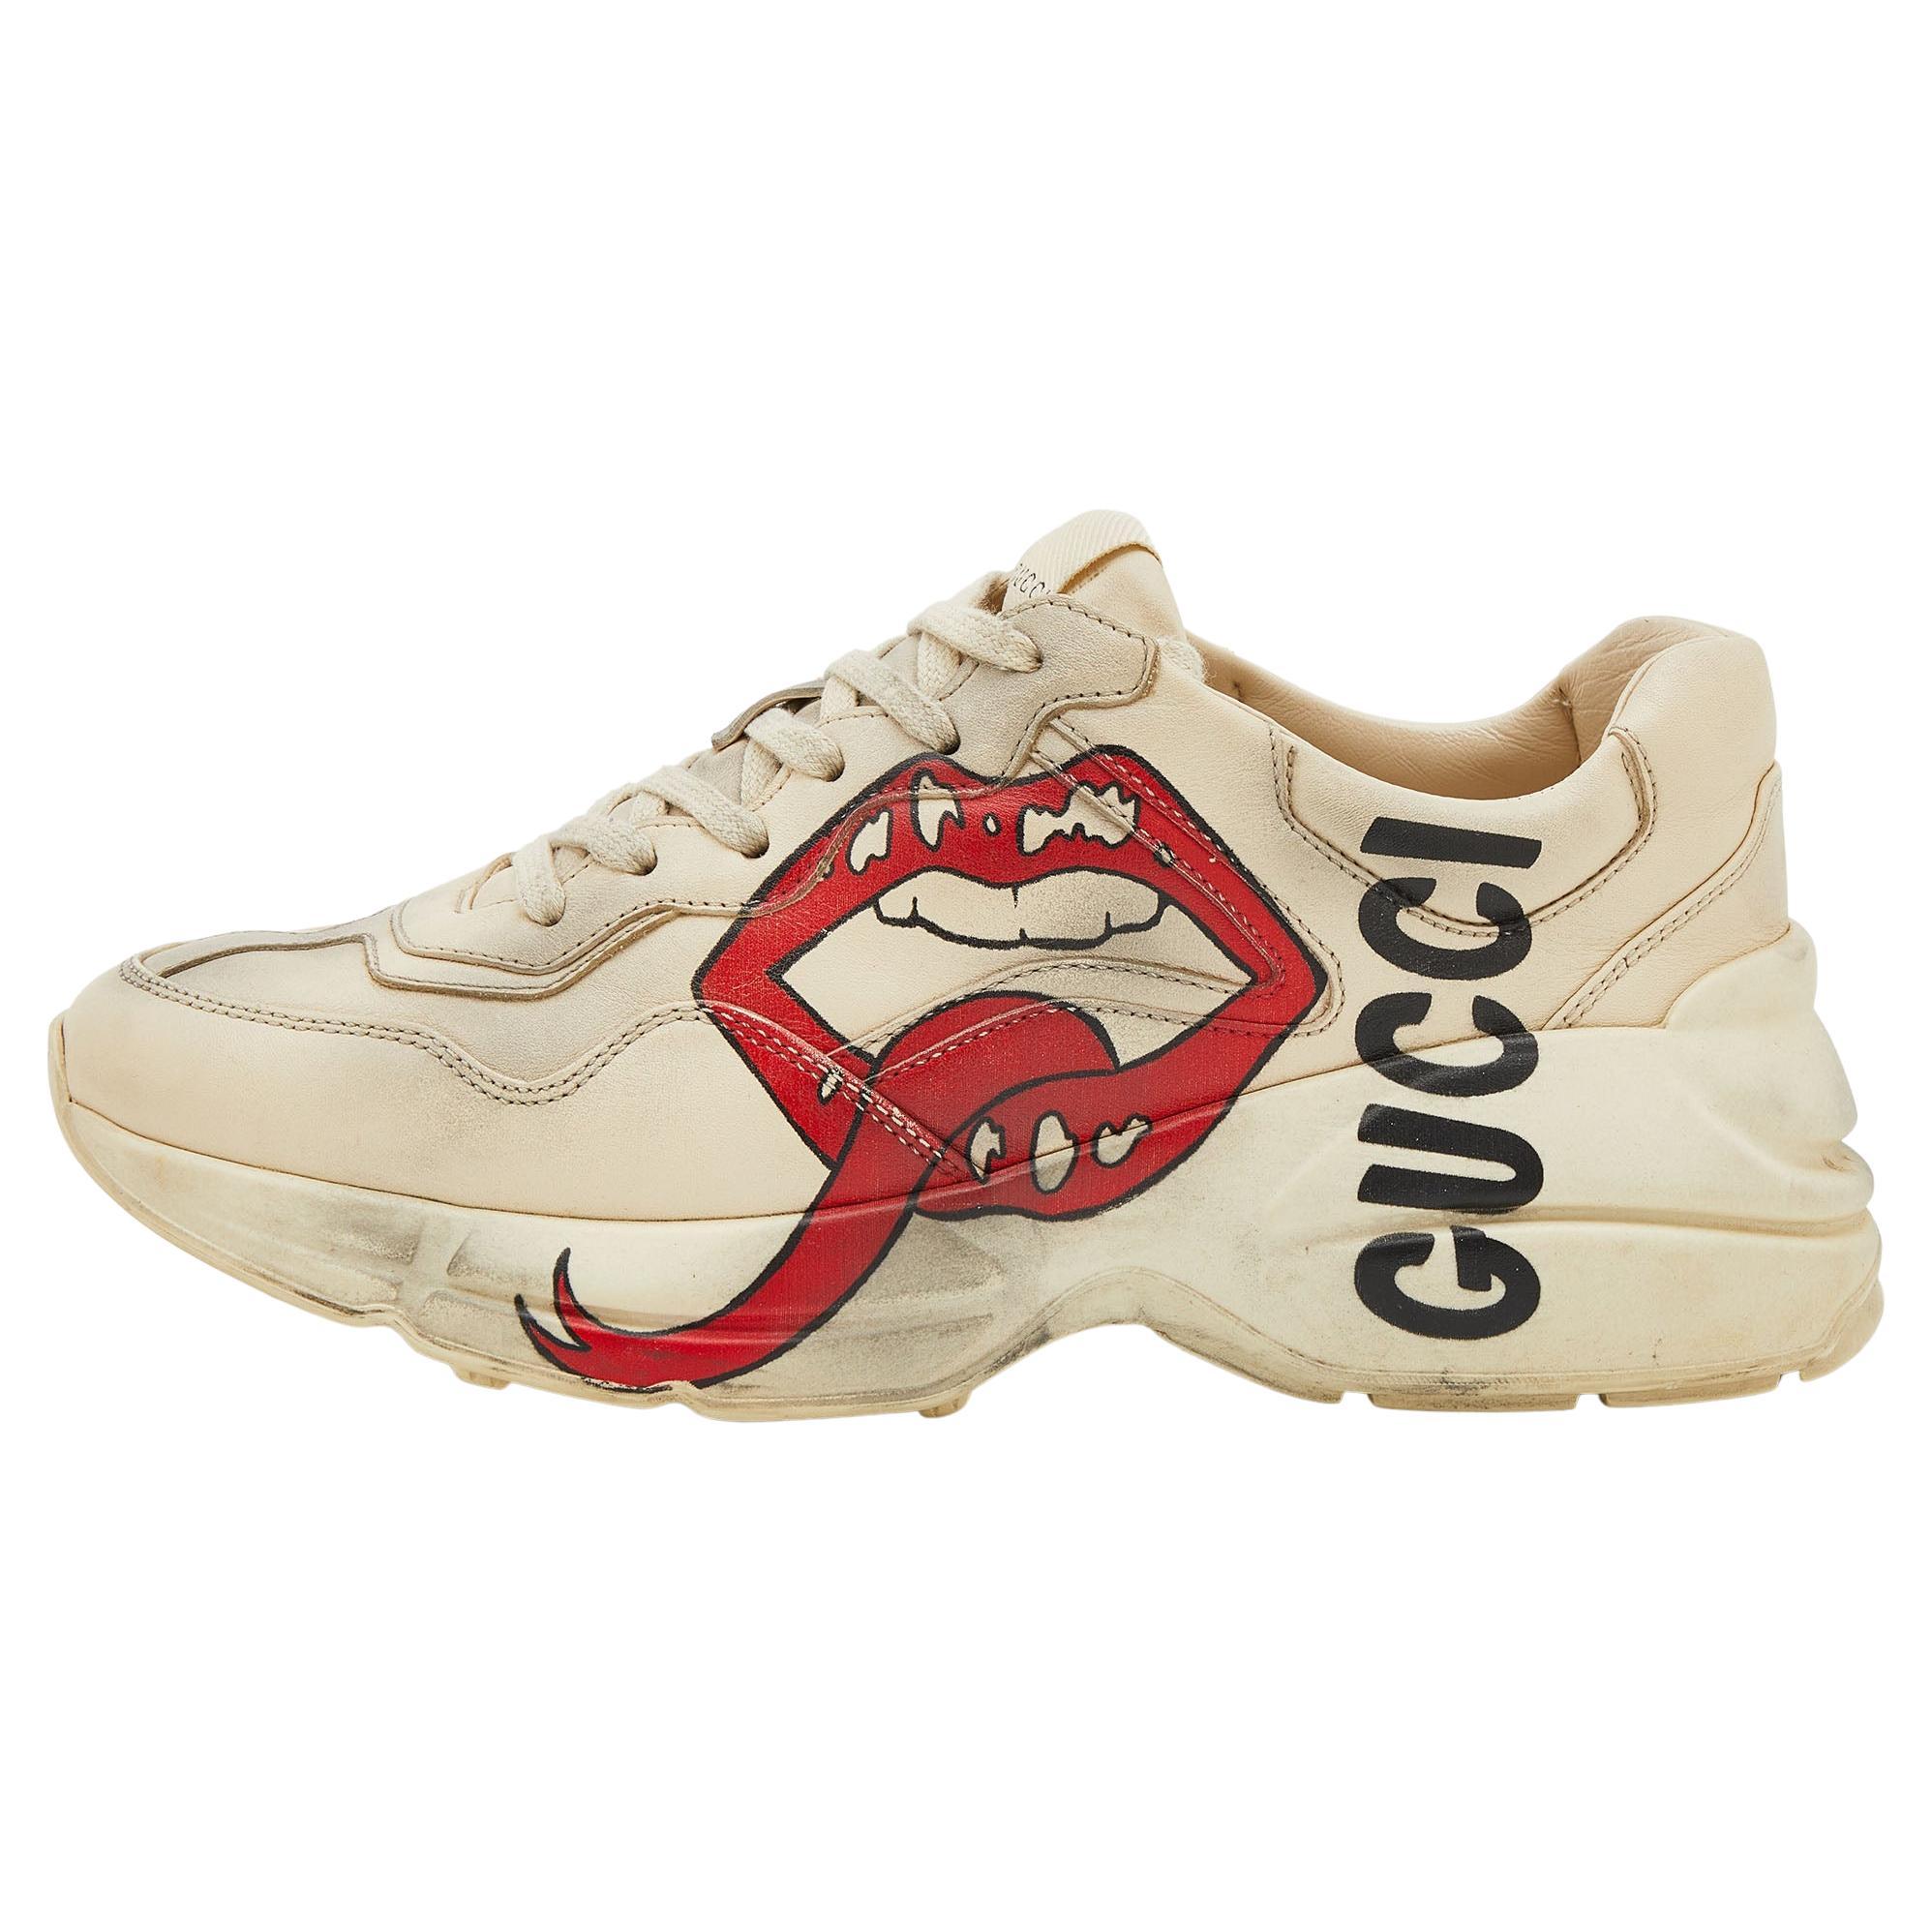 Gucci Cream/Grey Leather Rhyton Gucci Logo Lace Up Sneakers Size 38.5